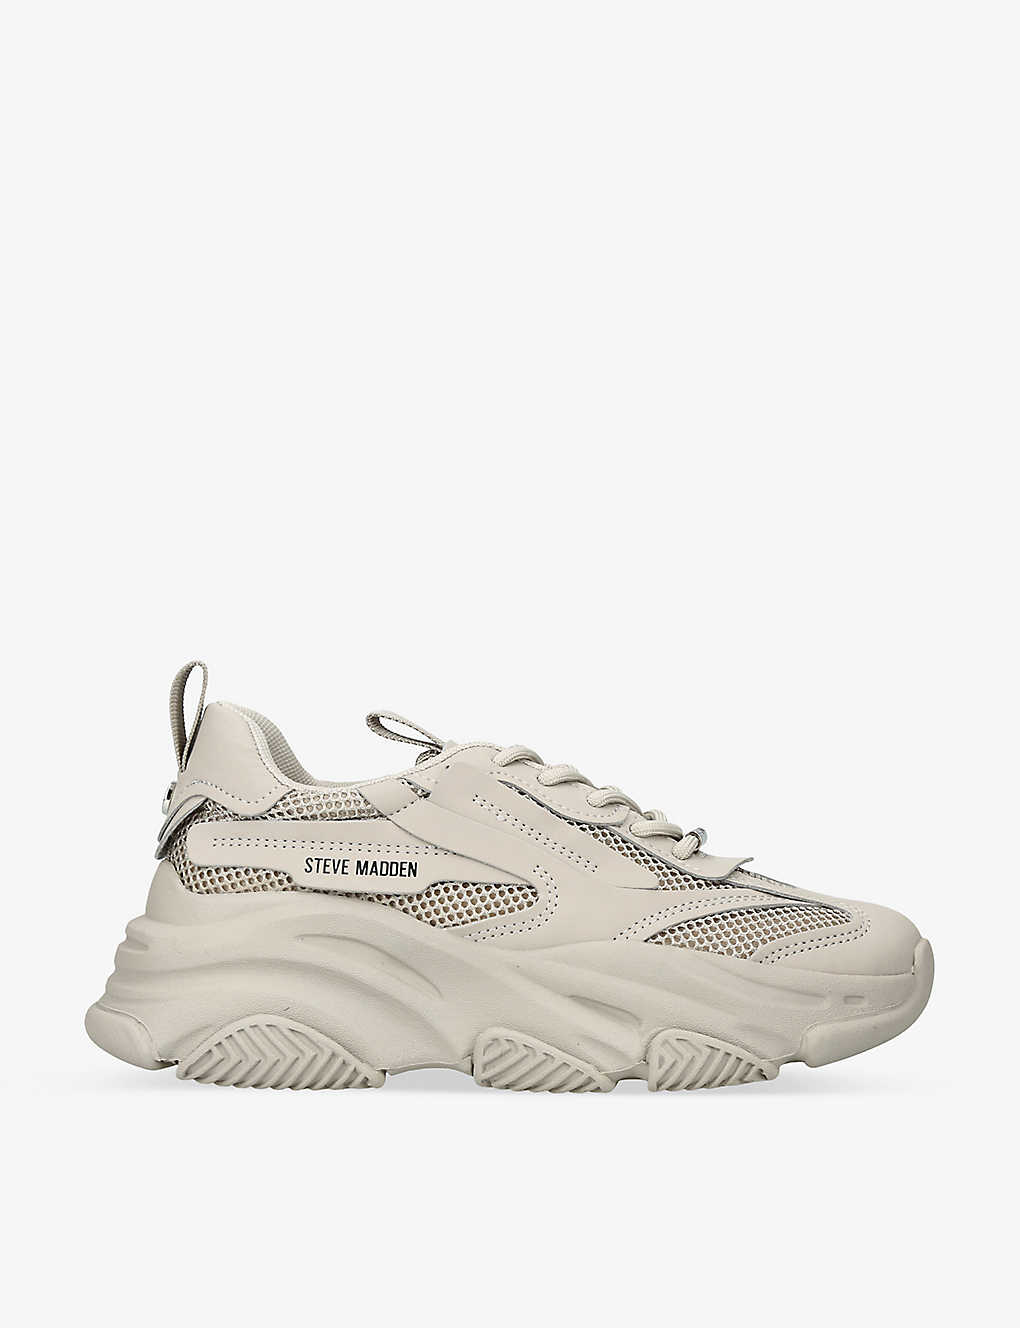 Steve Madden Possession Faux-leather And Mesh Trainers In Grey/light